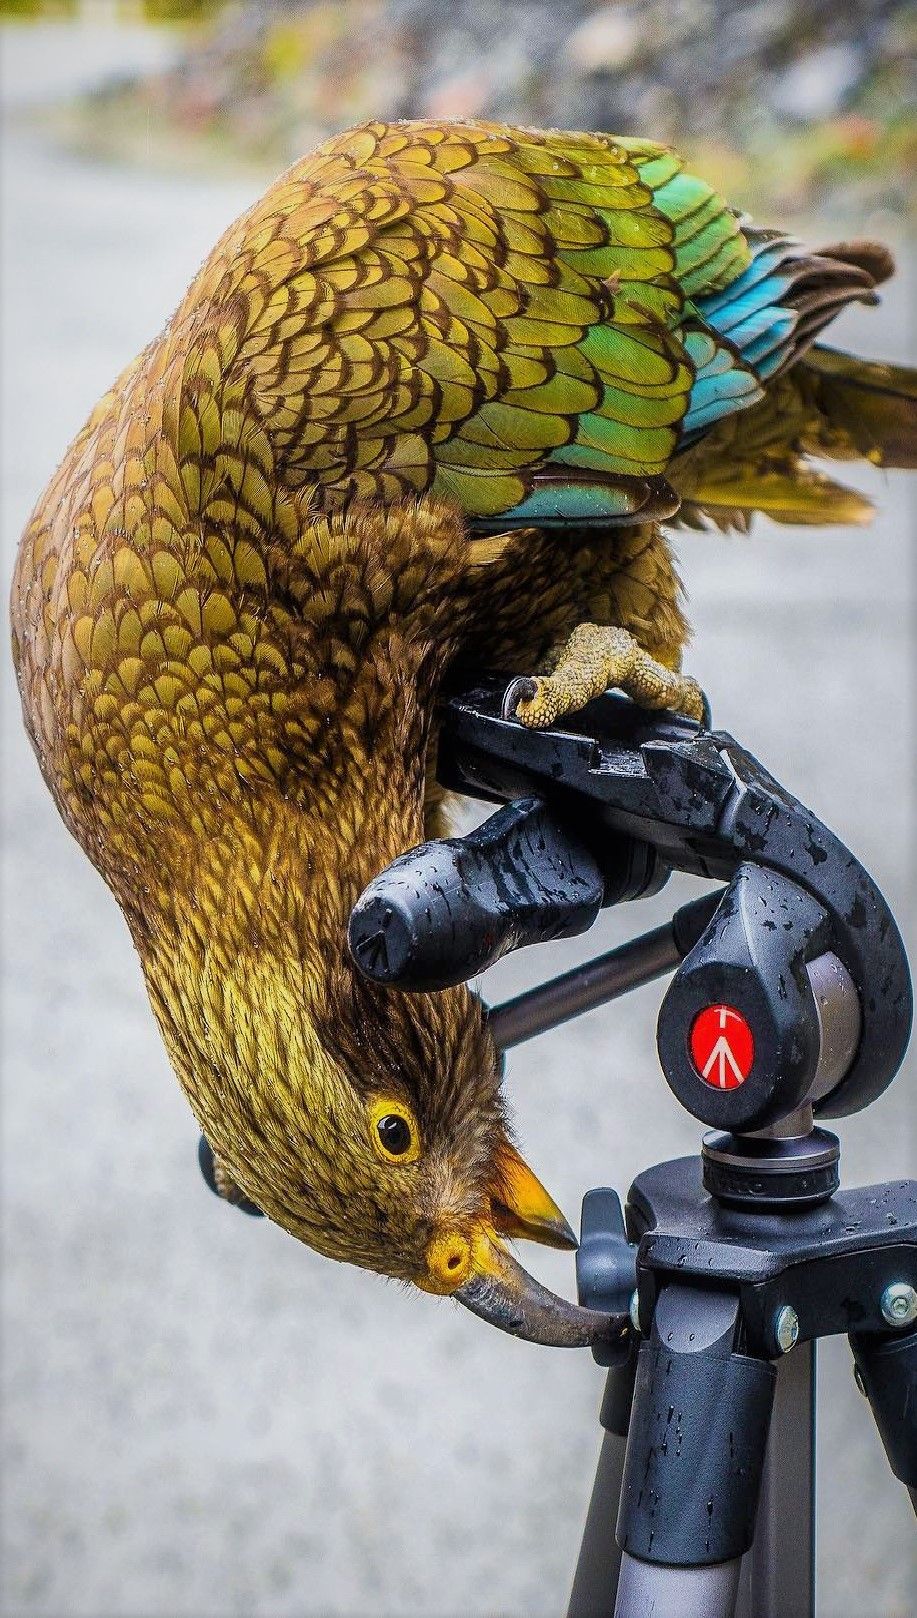 Kea can solve logical puzzles, such as pushing, pulling and turning things in a certain order to get to food, and will even work together to achieve a certain objective. They have been filmed preparing and using tools.